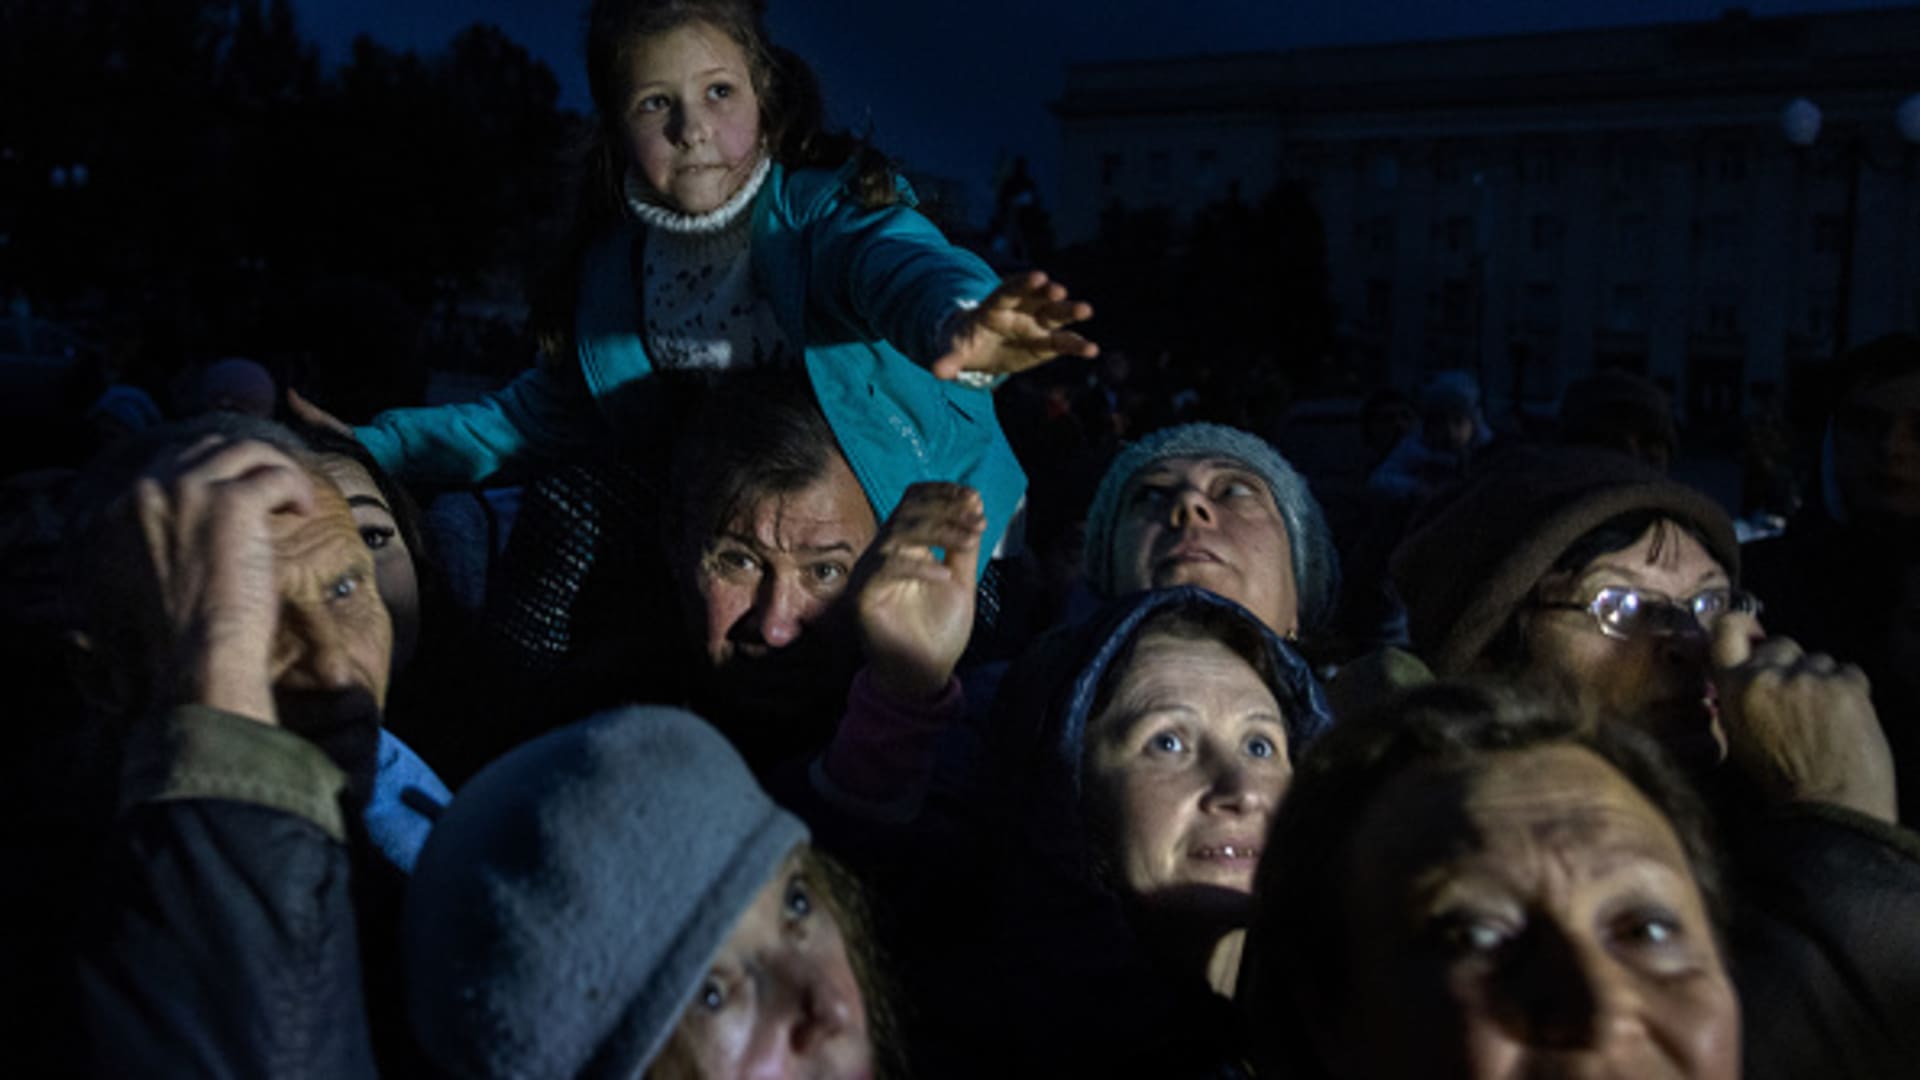 Kherson residents receive humanitarian aid waiting after dark as the city deals with no electricity or water since the Russian retreat on November 16, 2022 in Kherson, Ukraine.